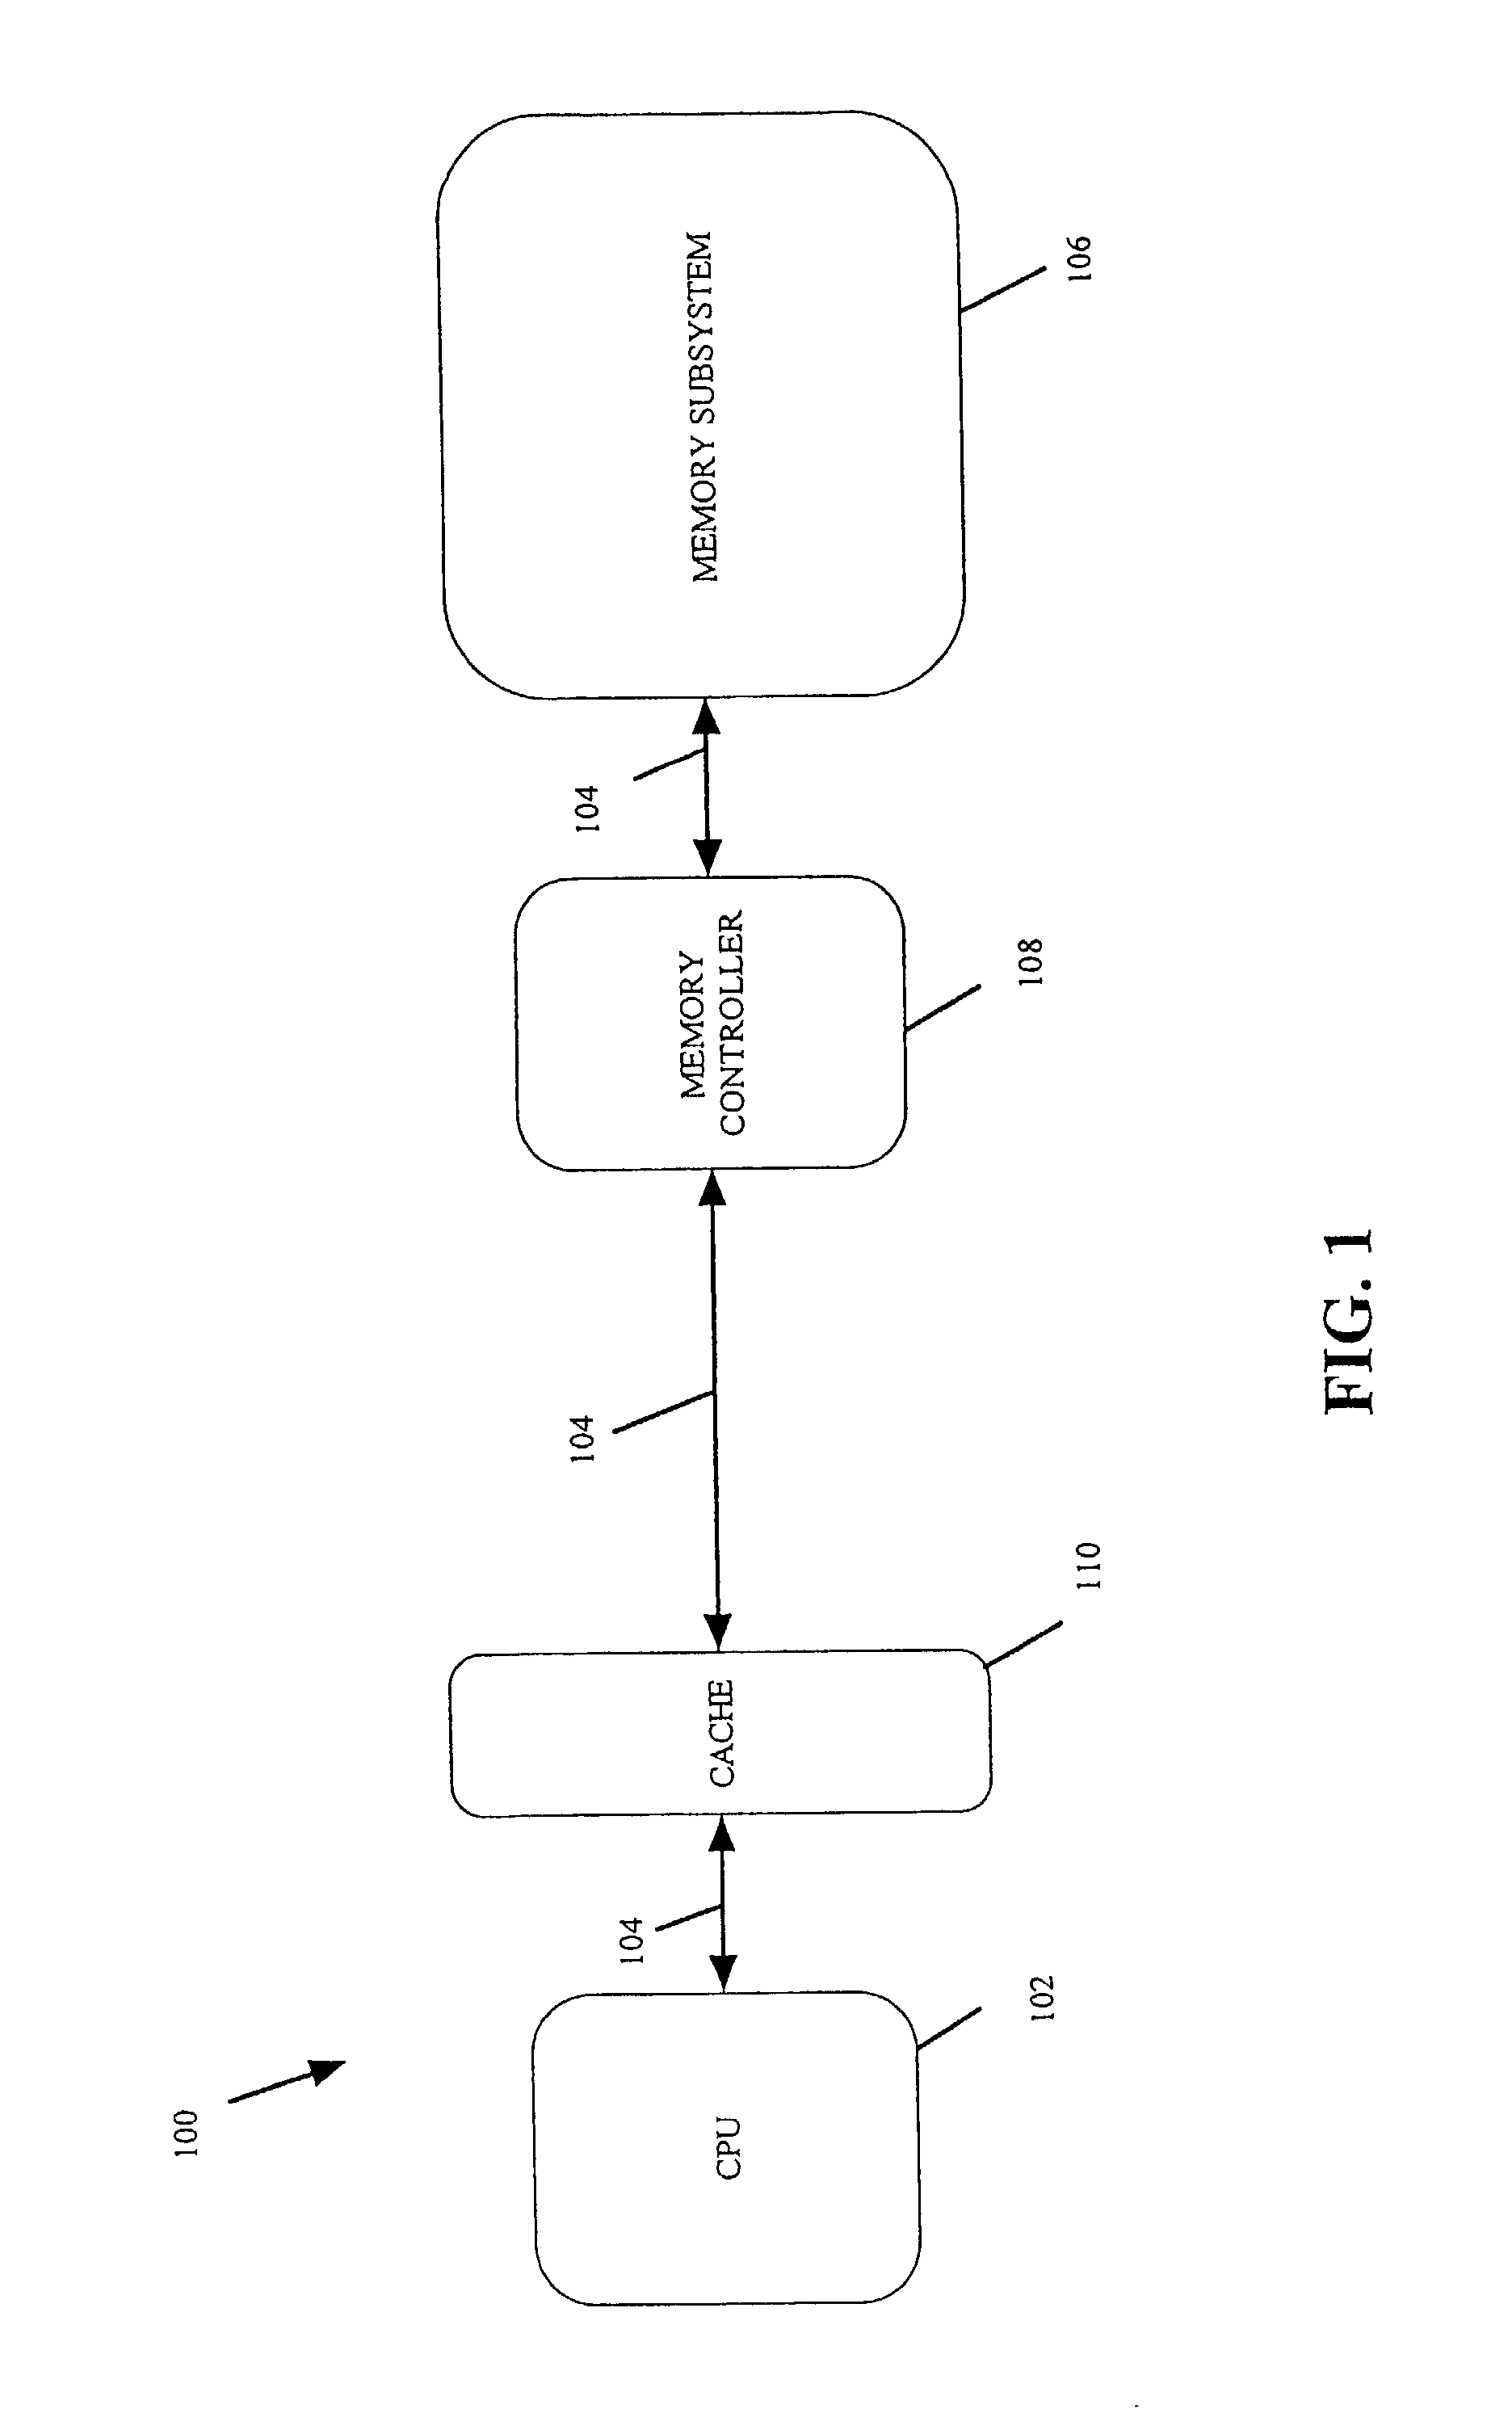 Interface circuits for modularized data optimization engines and methods therefor